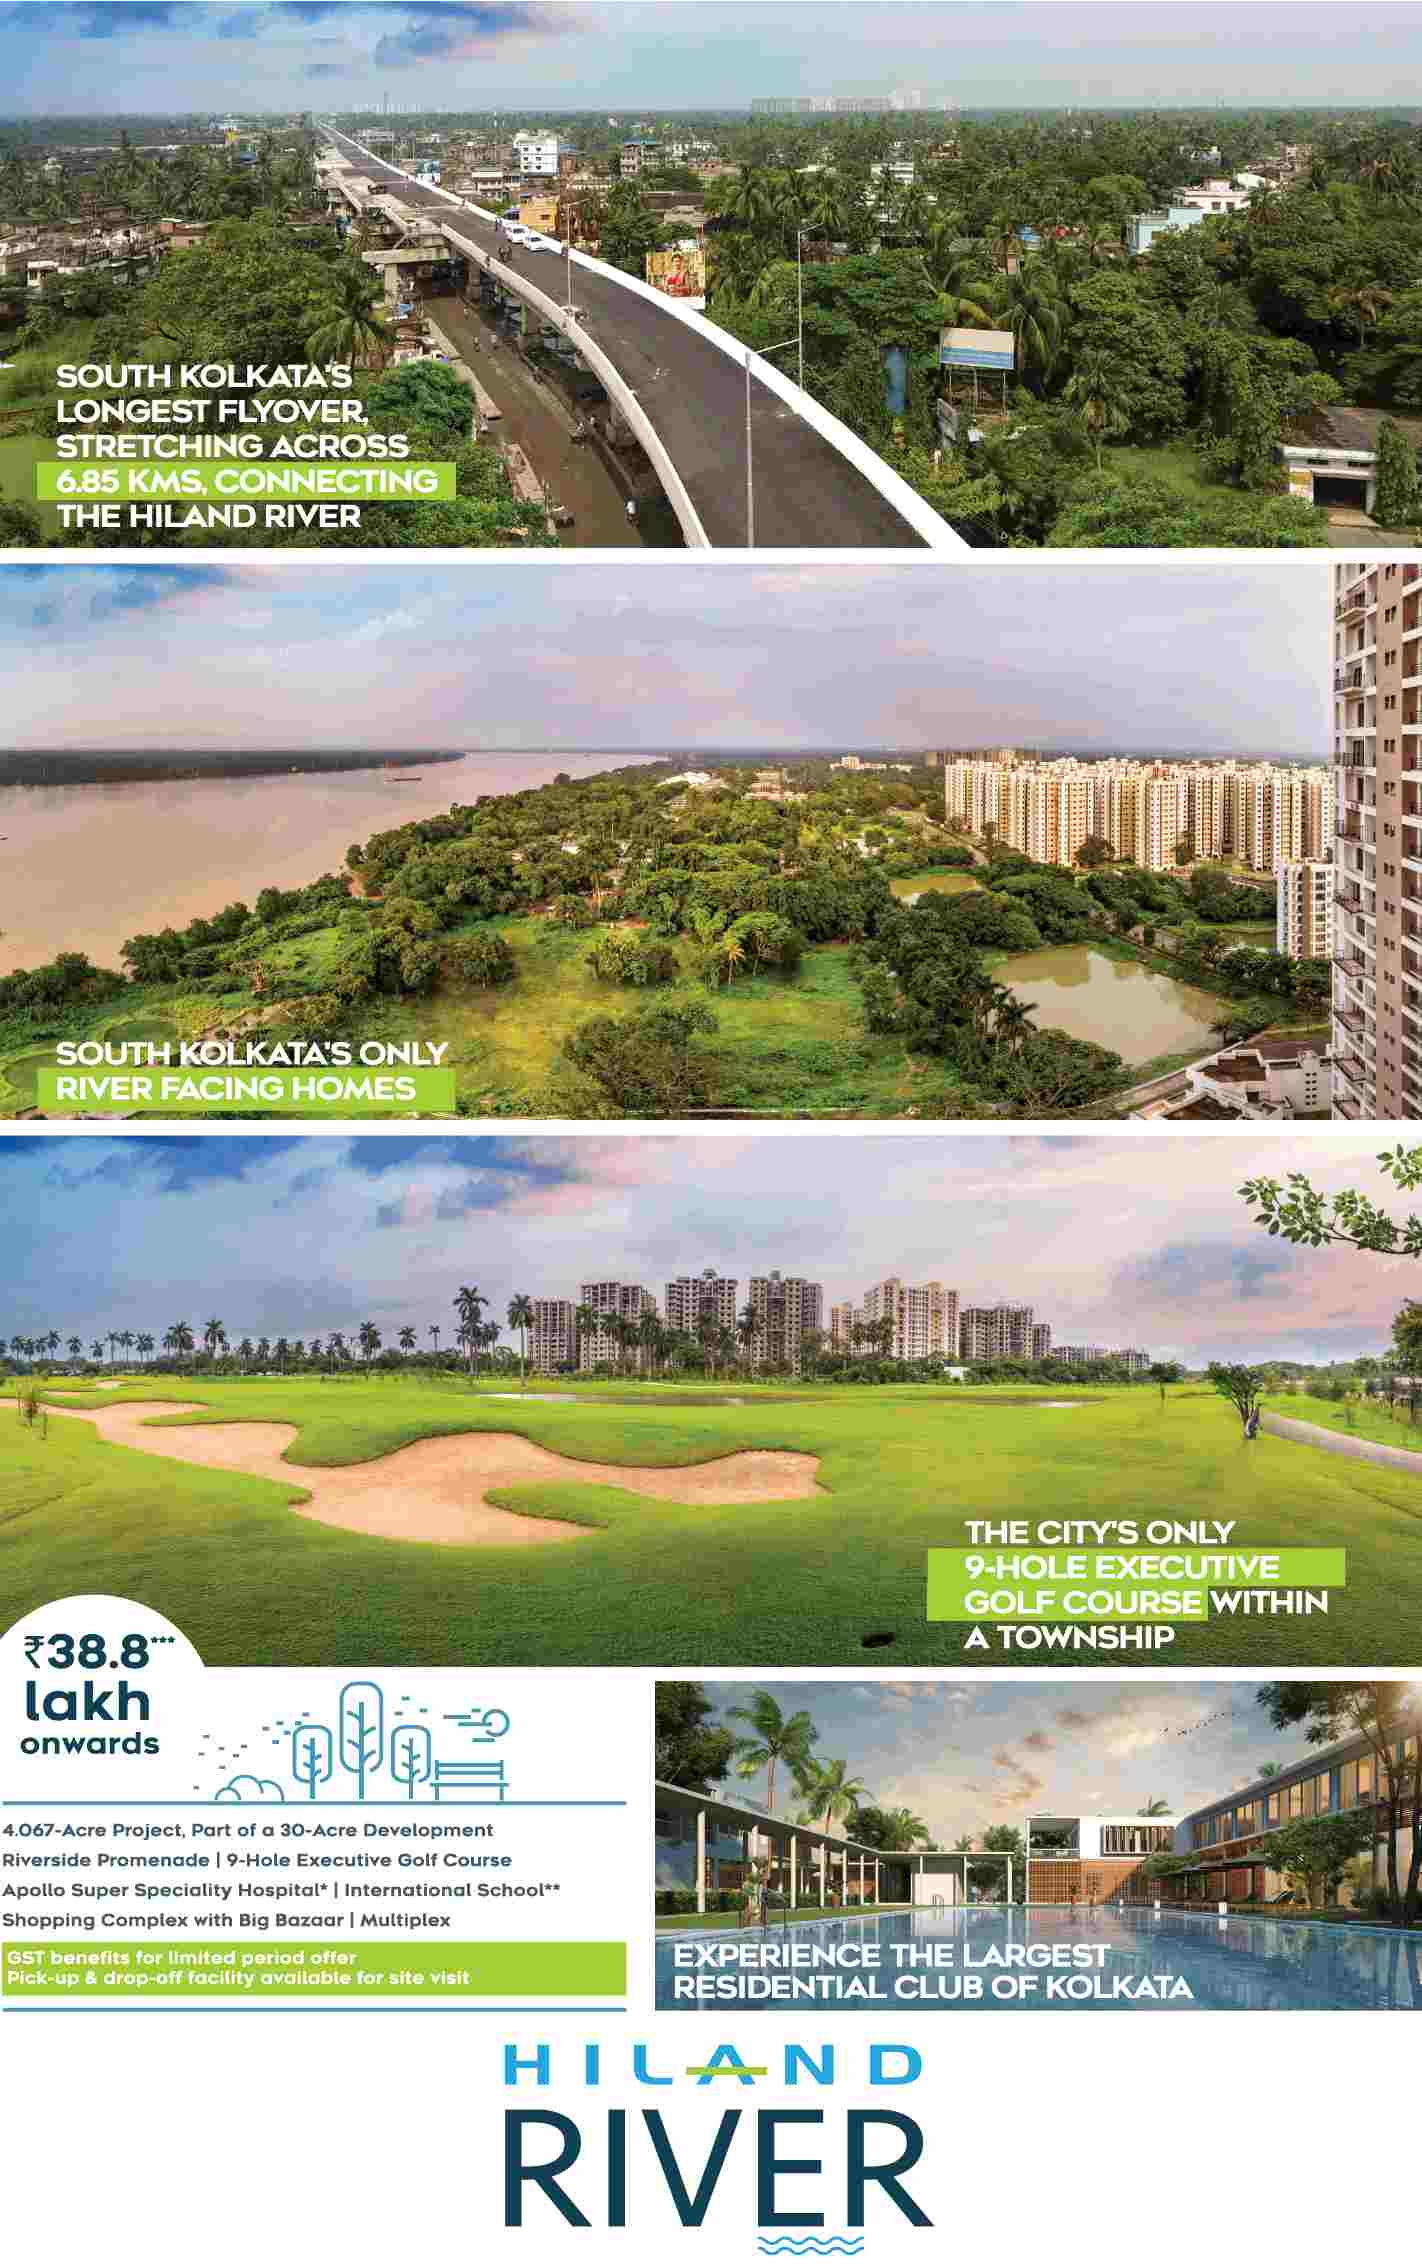 Book your riverside residence @ Rs 38.8 lakhs at Hiland River in Kolkata Update